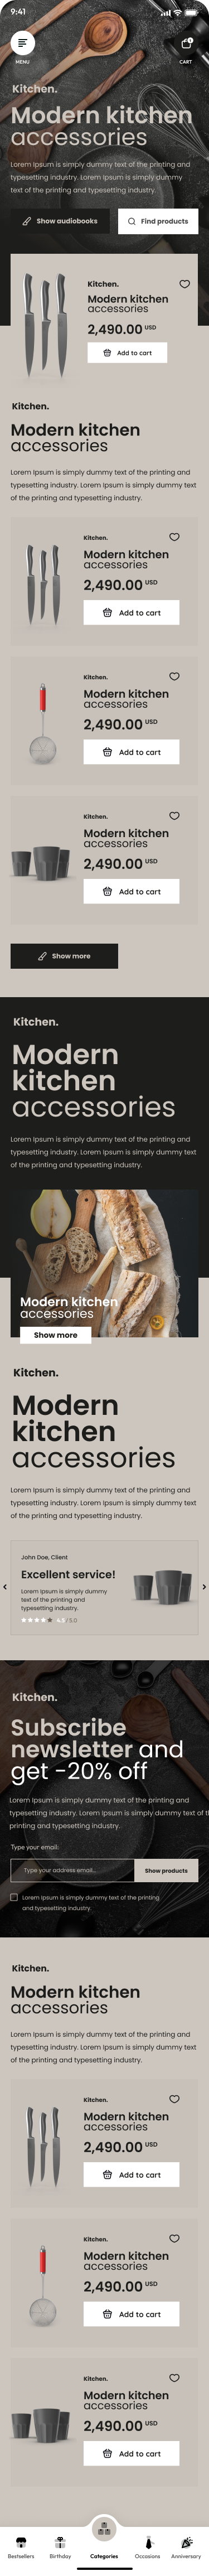 Kitchen – Mobile Apps for eCommerceGo SaaS